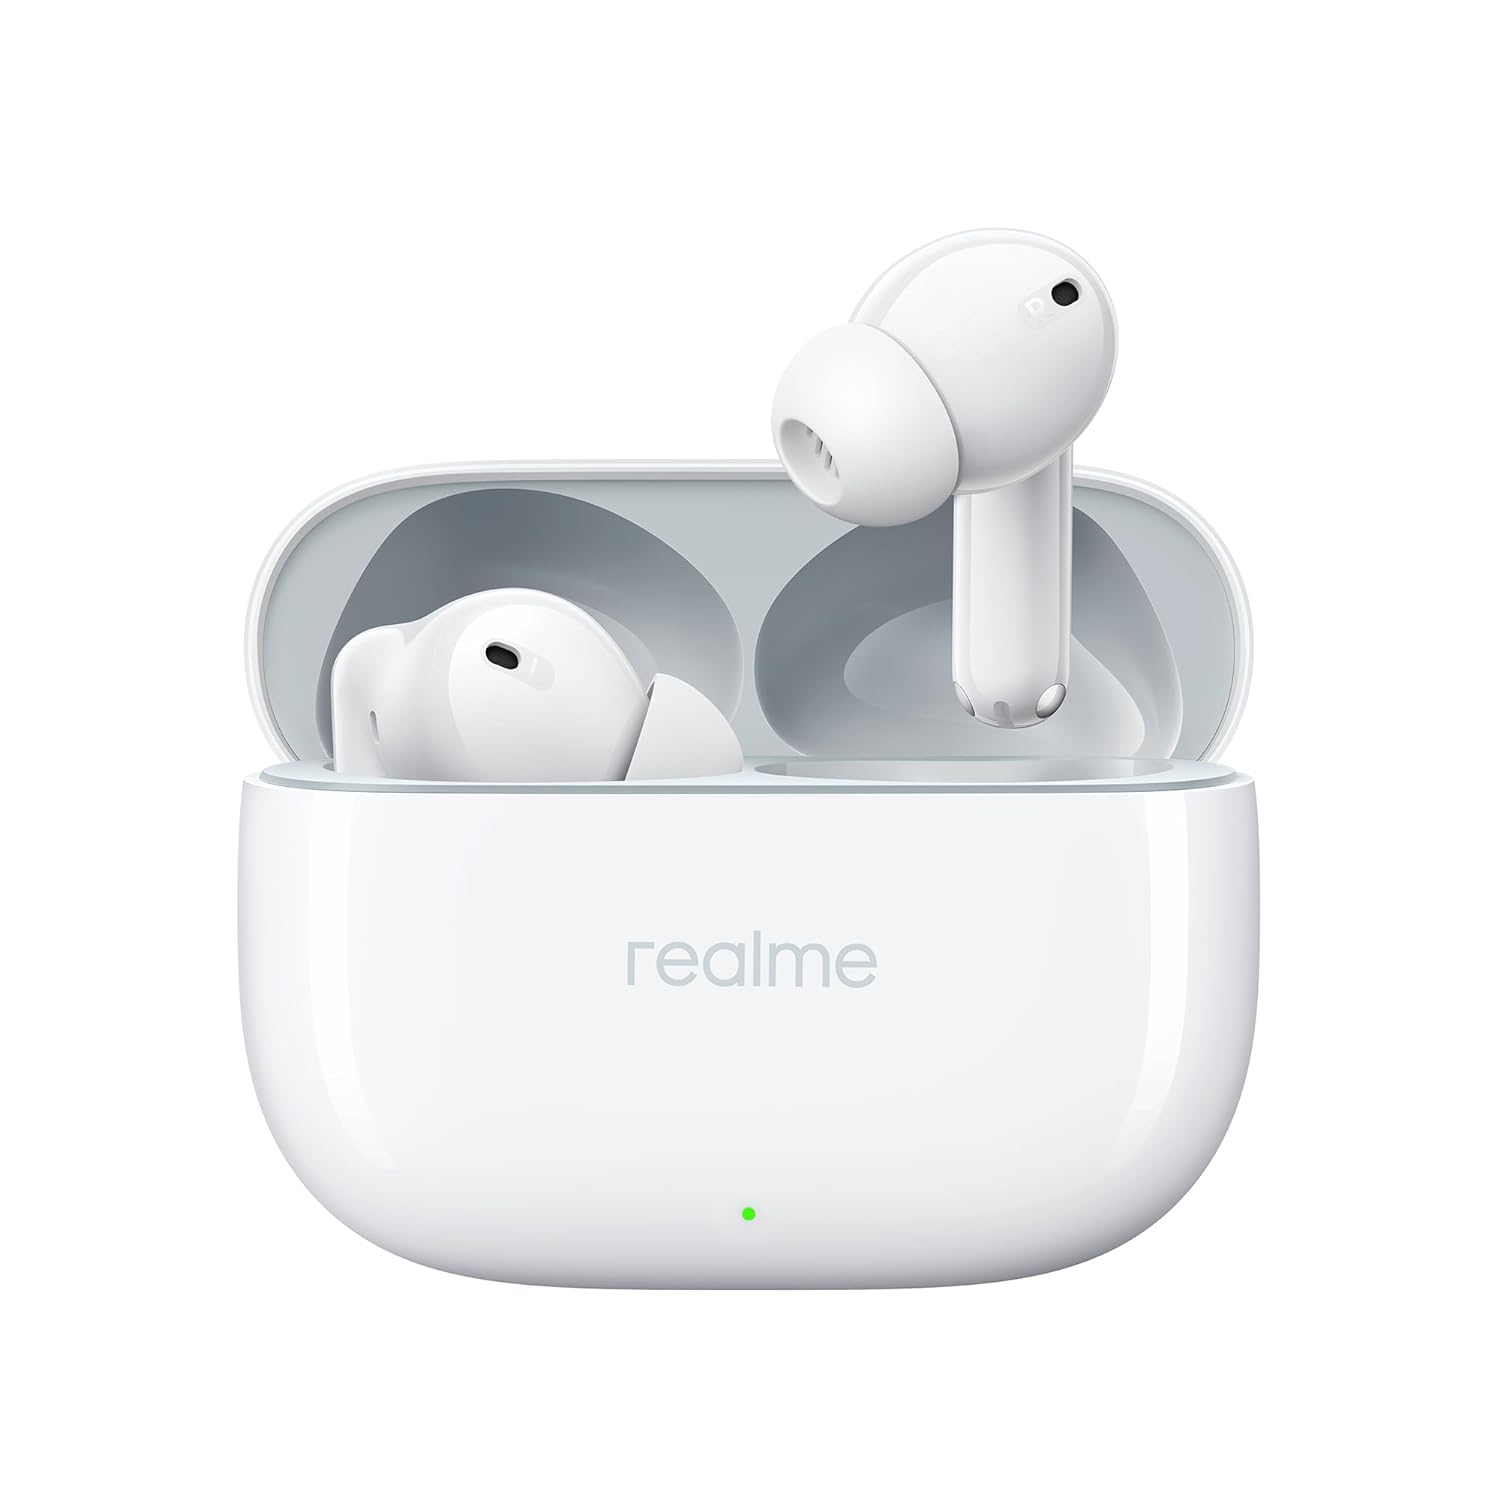 Realme Buds T300 Truly Wireless In-Ear Earbuds with 30dB ANC (White)